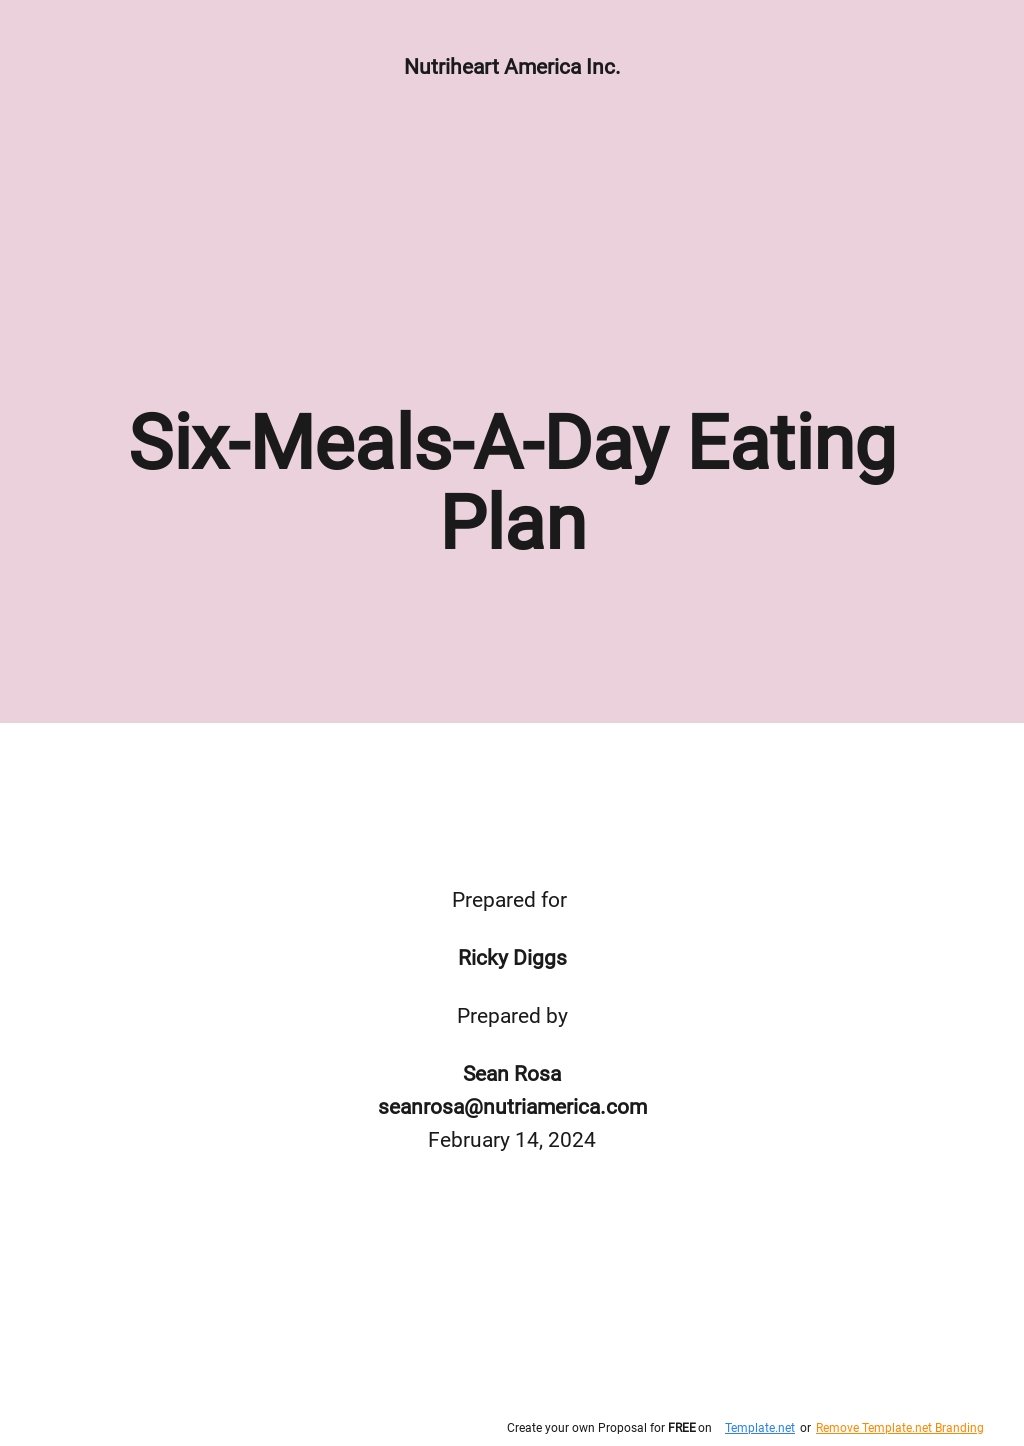 6 Meals a Day Meal Plans Templates Word - Format, Free, Download ...